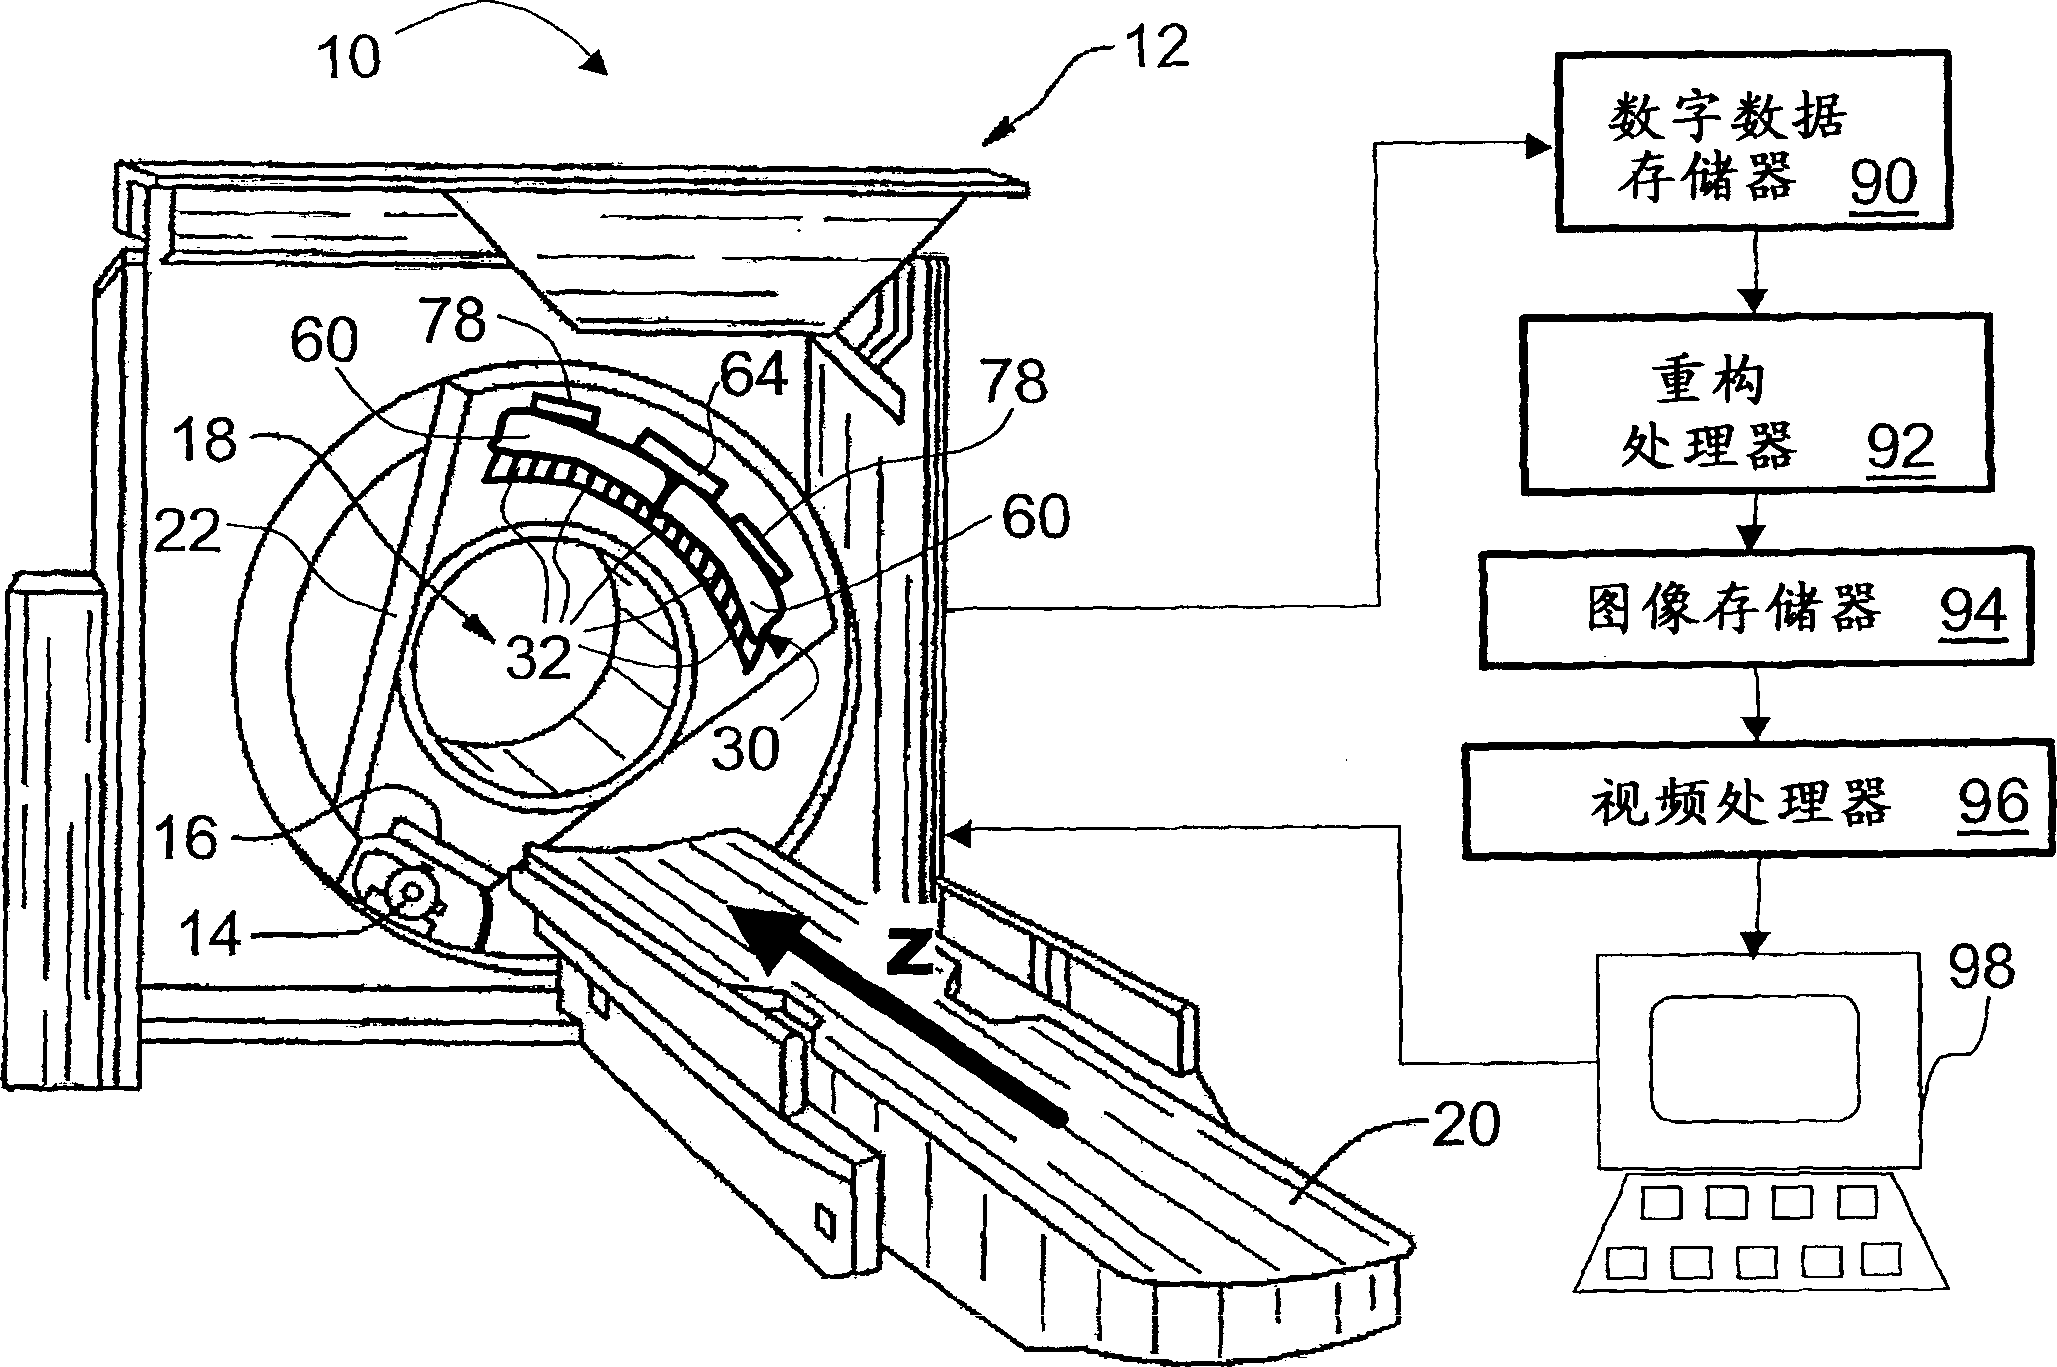 Symmetrical multiple-slice computed tomography data measuring system